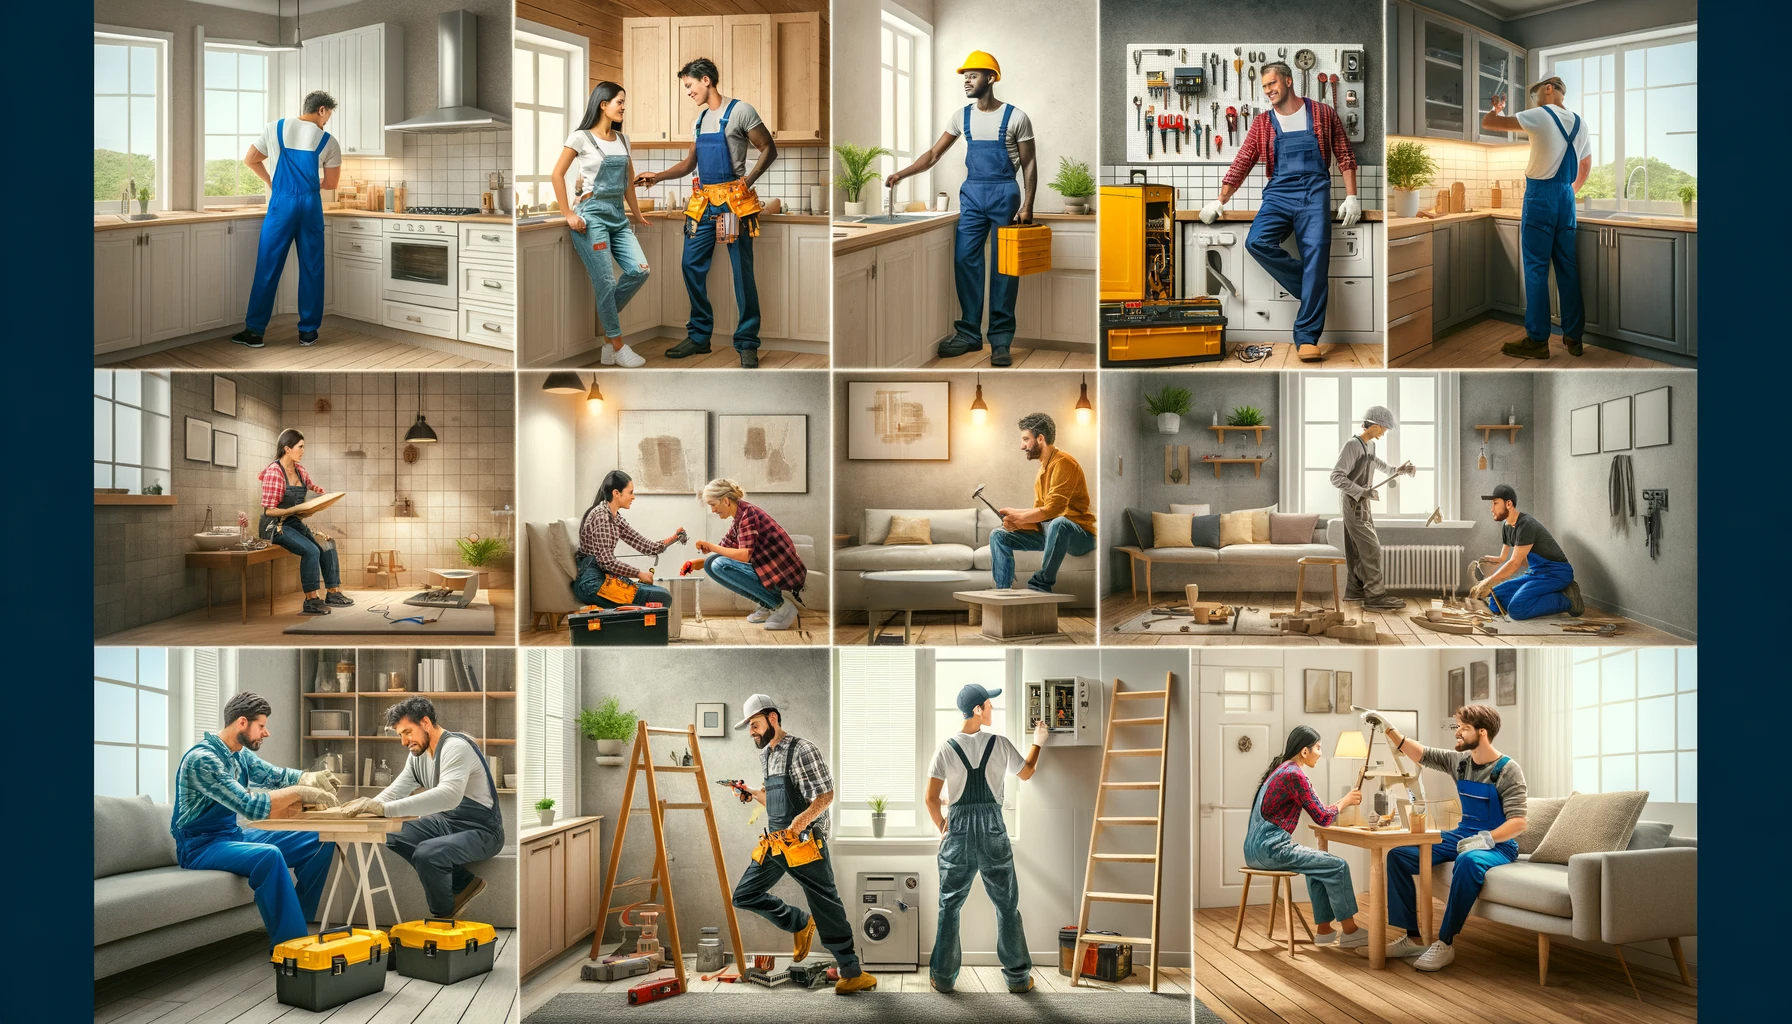 A dynamic depiction of diverse home service professionals, including a plumber, electrician, carpenter, and painter in a modern home.